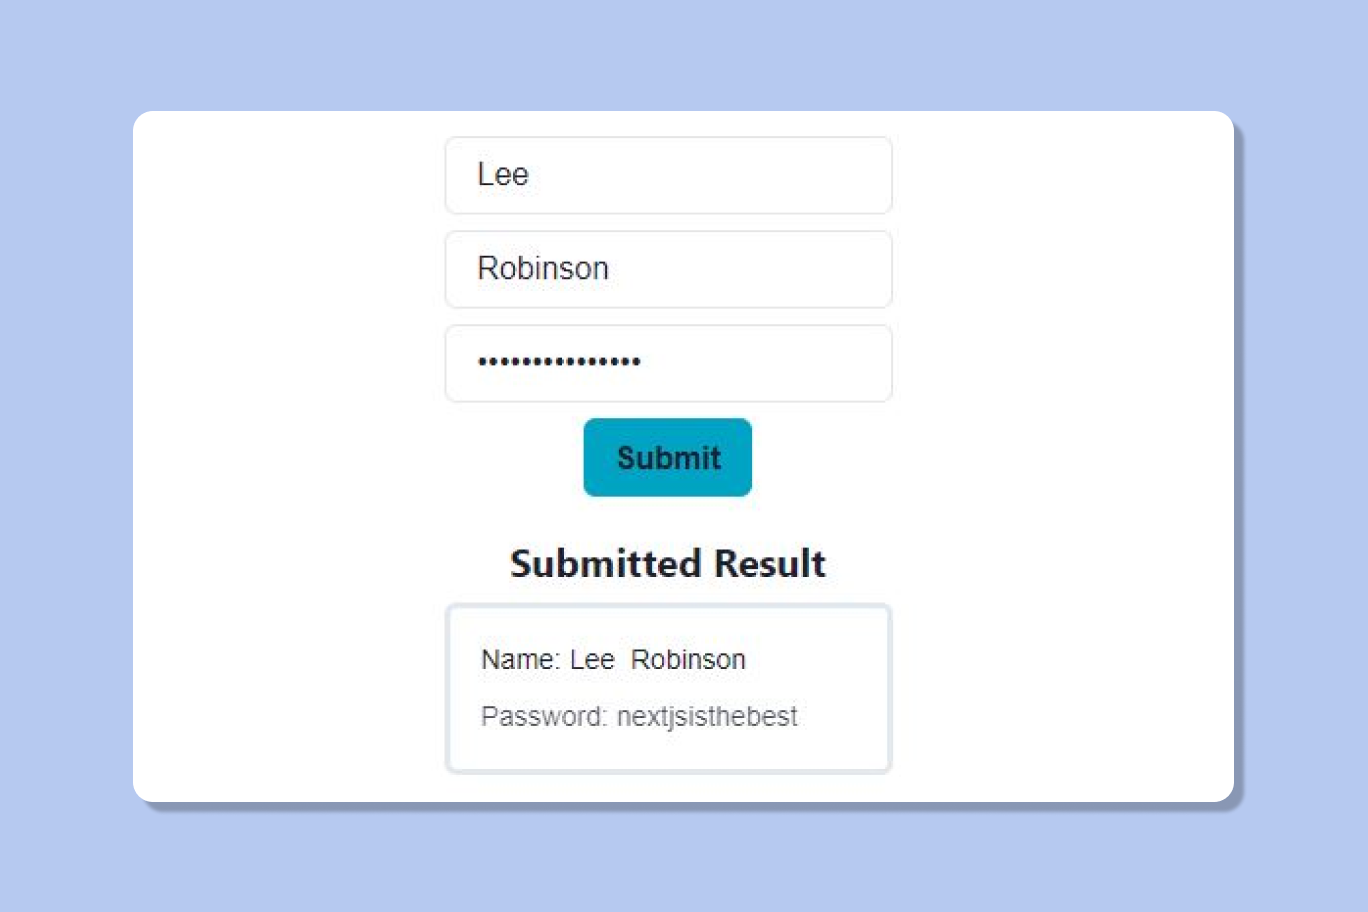 Result displayed to front-end